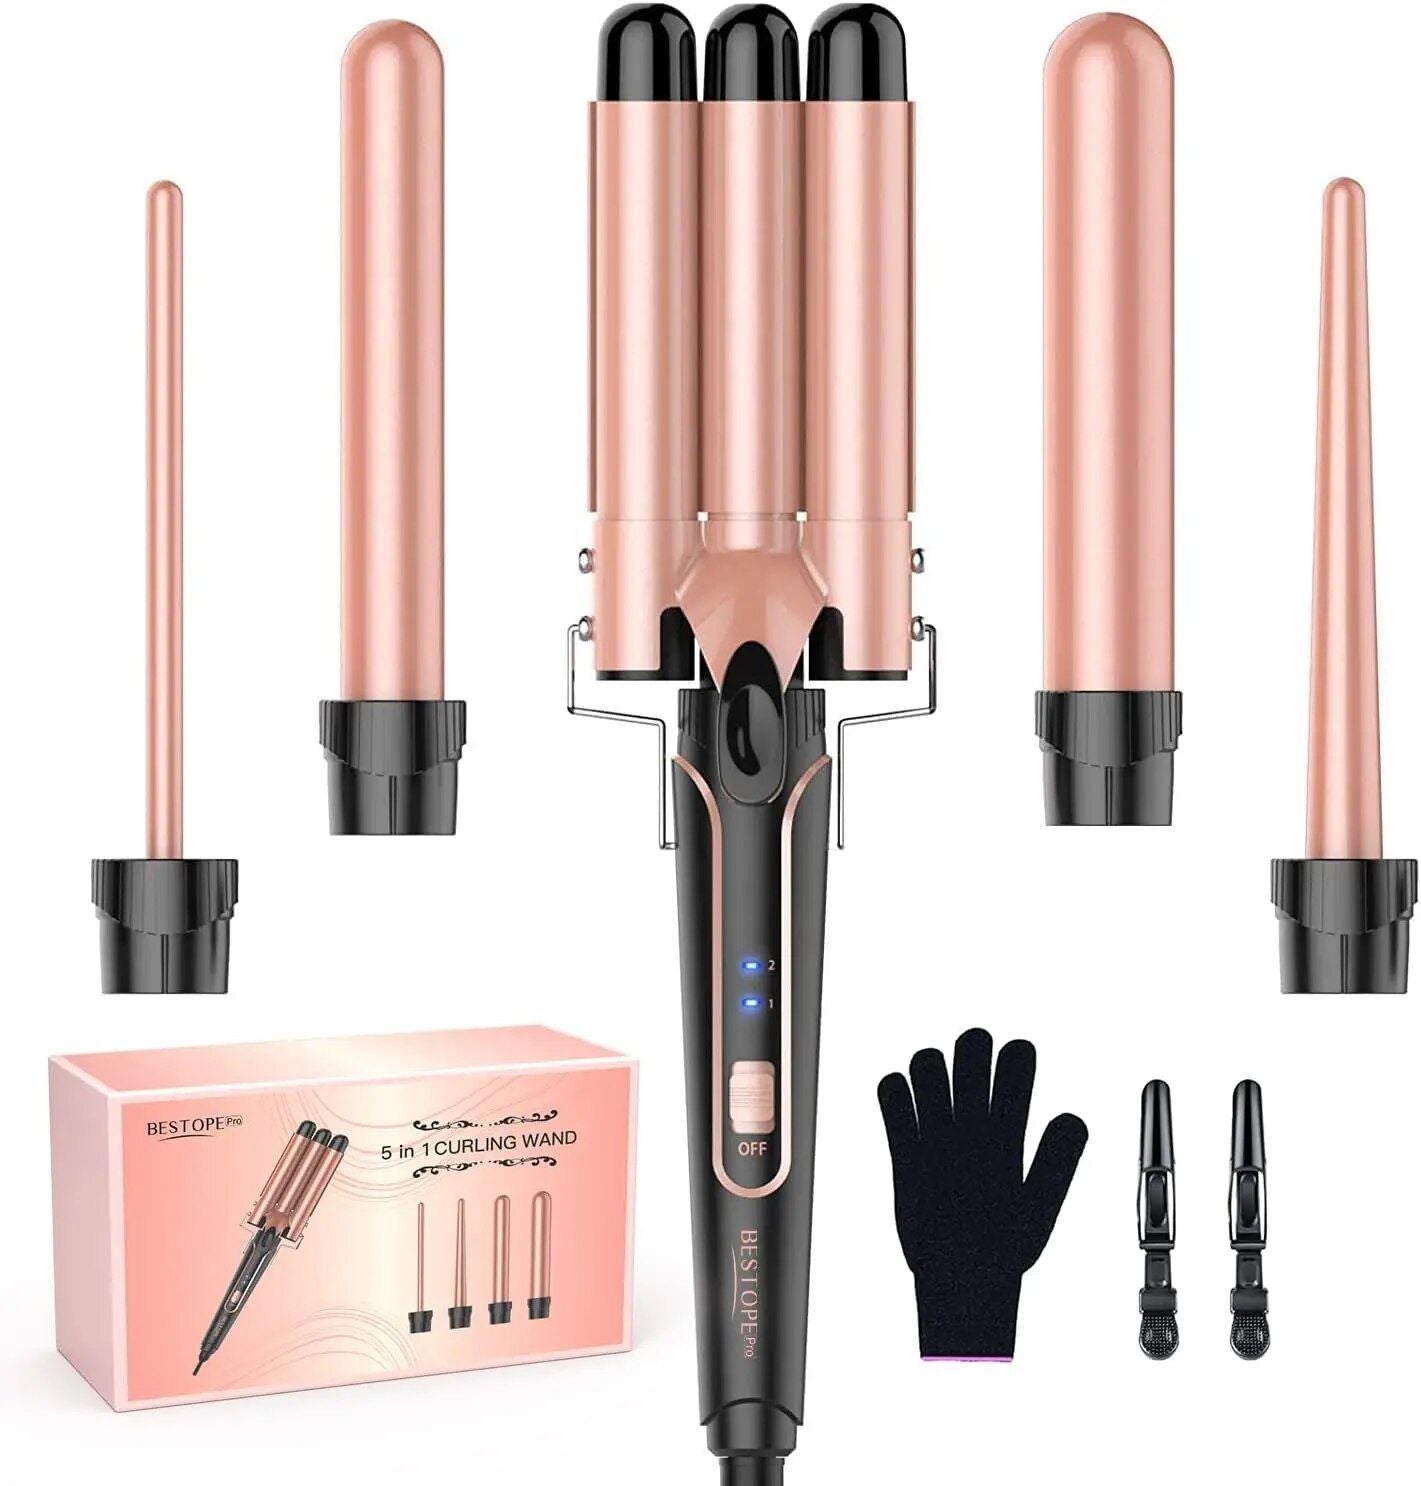 5-in-1 Multi-Function Curling Wand with 3-Barrel Crimper & Fast Heating